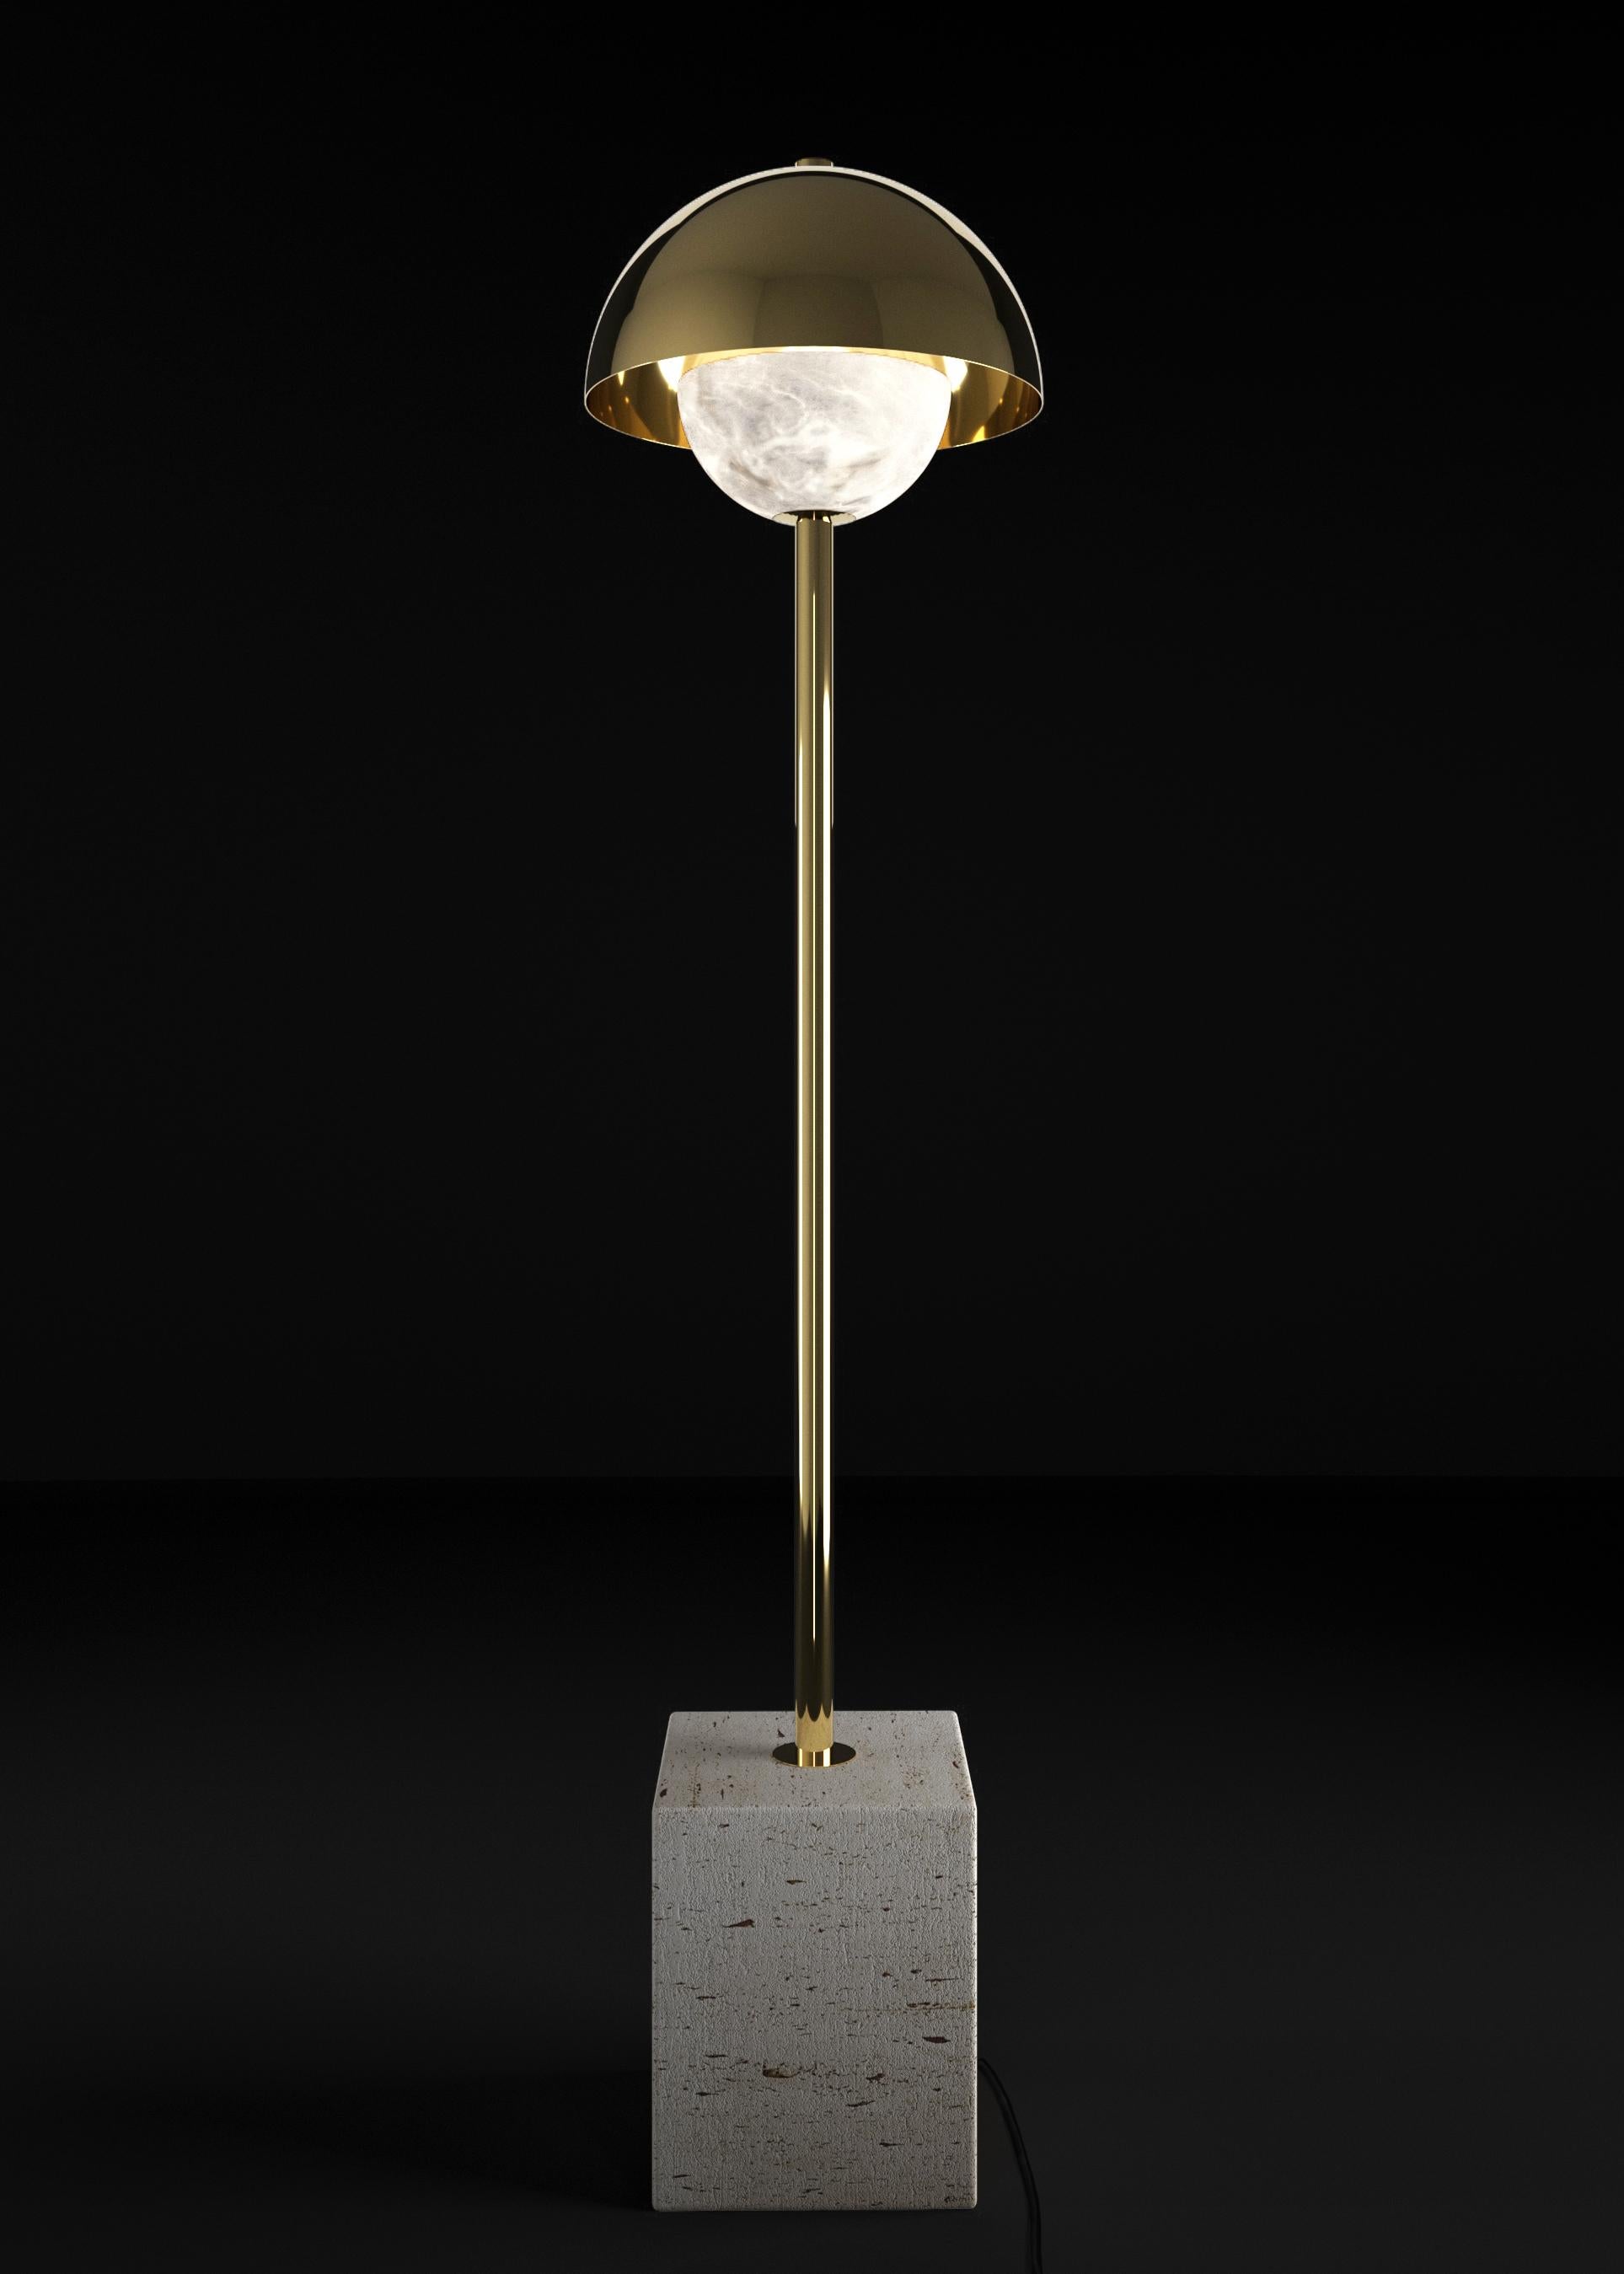 Apollo Shiny Gold Metal Floor Lamp by Alabastro Italiano
Dimensions: D 30 x W 30 x H 130 cm.
Materials: White alabaster, marble, black silk cables and metal.

Available in different finishes: Shiny Silver, Bronze, Brushed Brass, Ruggine of Florence,